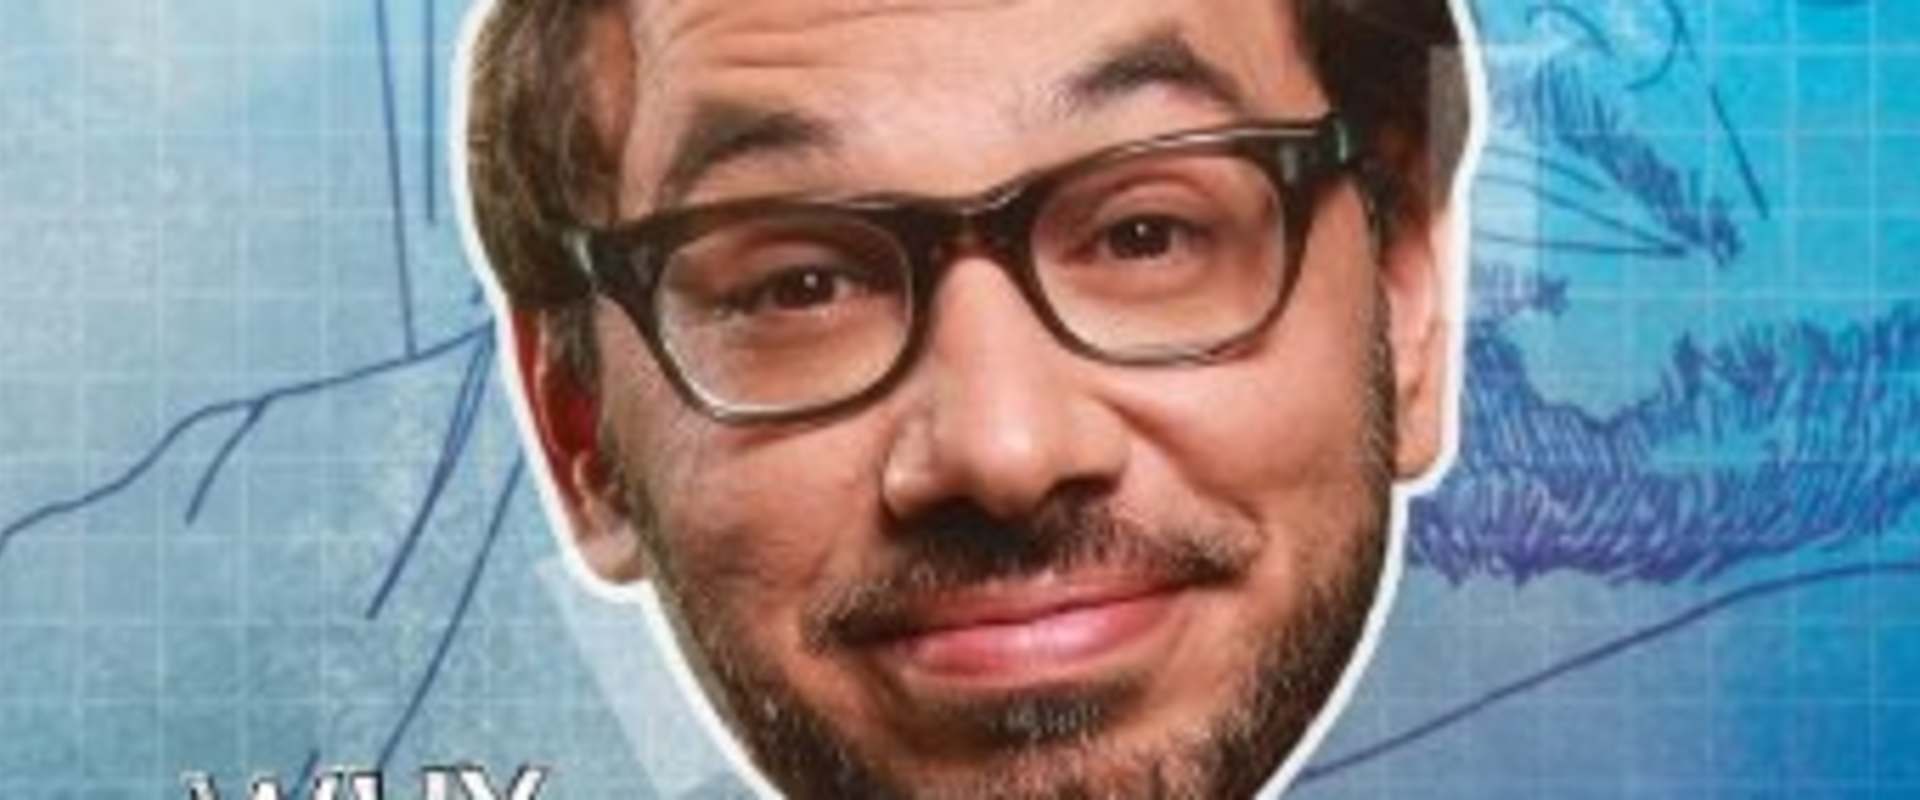 Al Madrigal: Why Is the Rabbit Crying? background 1